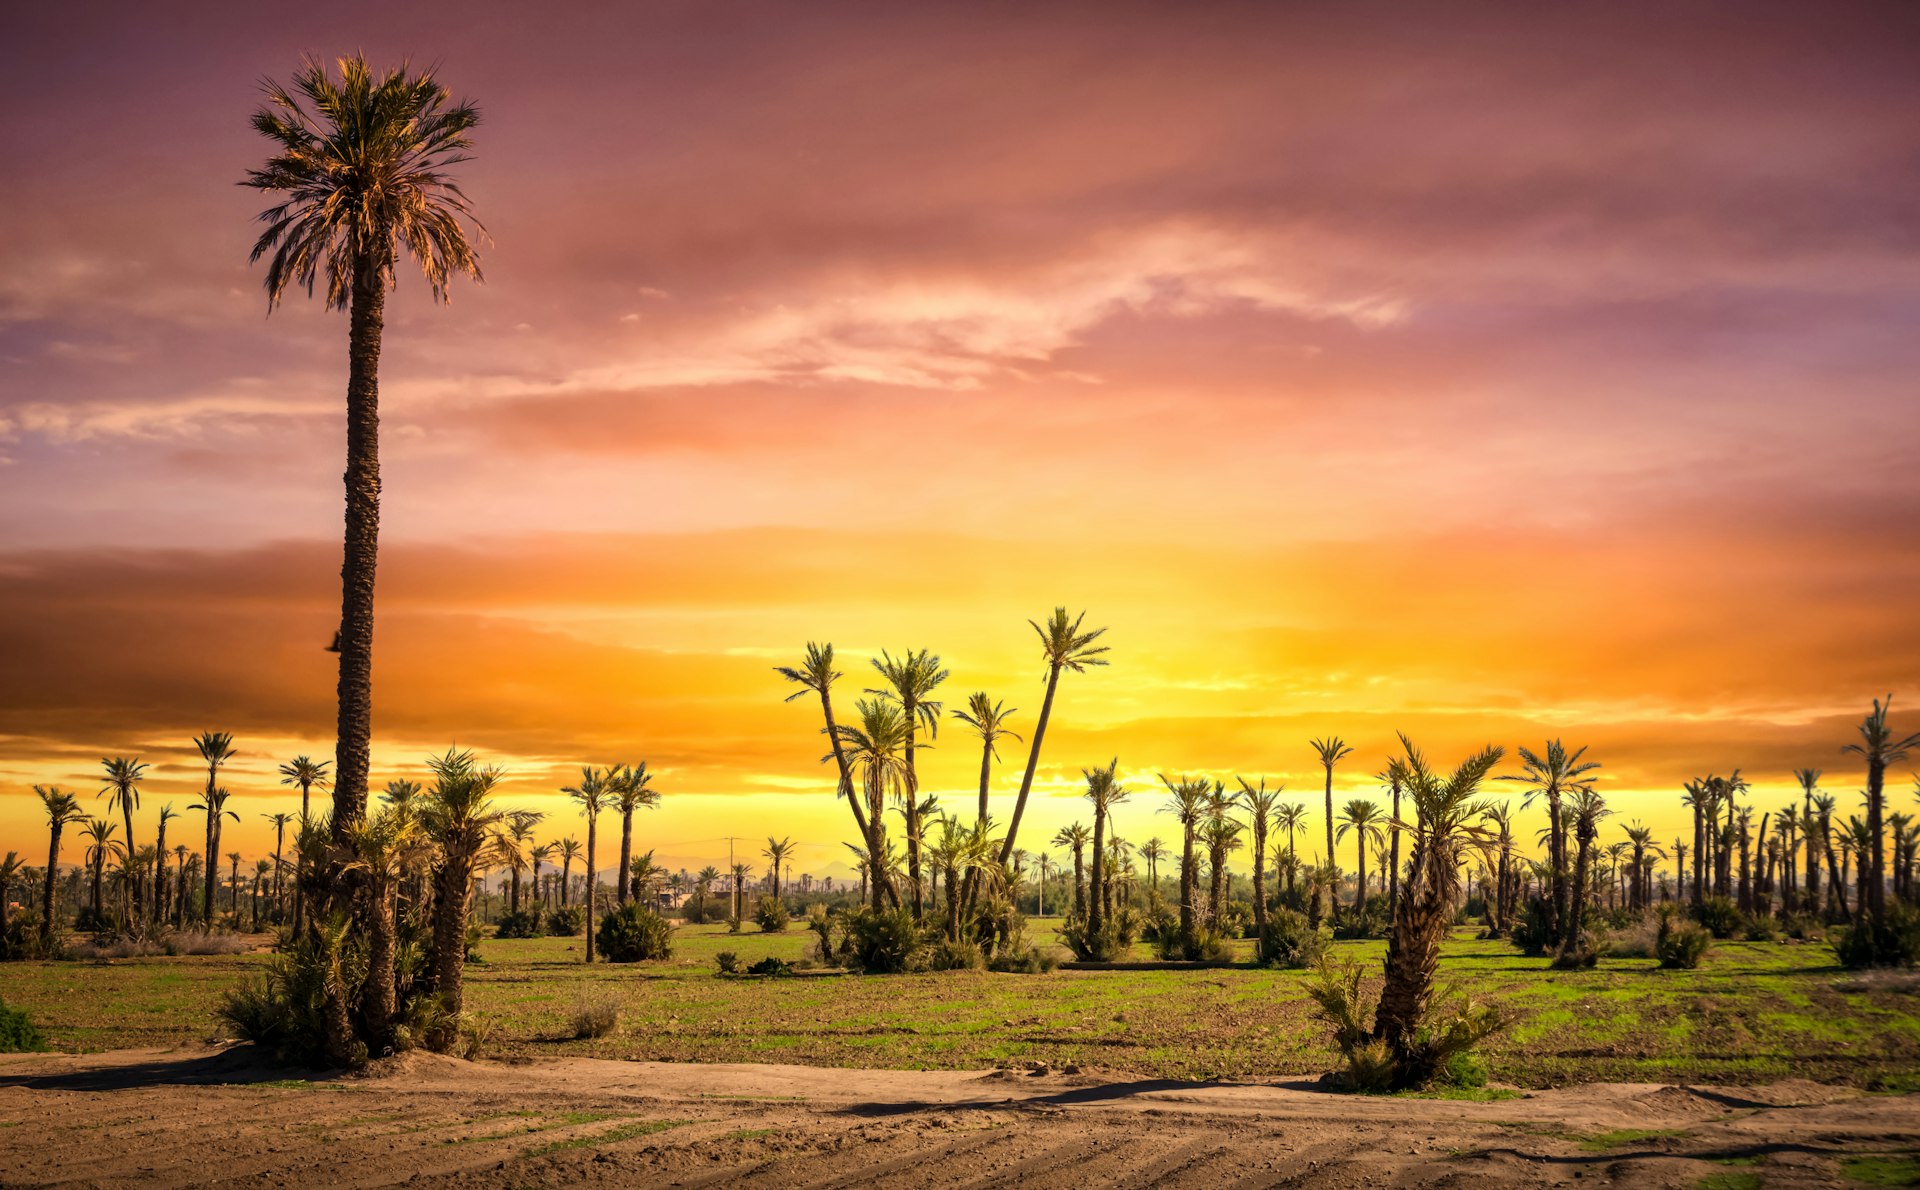 Sunset at the Palmeraie in Marrakesh, Morocco